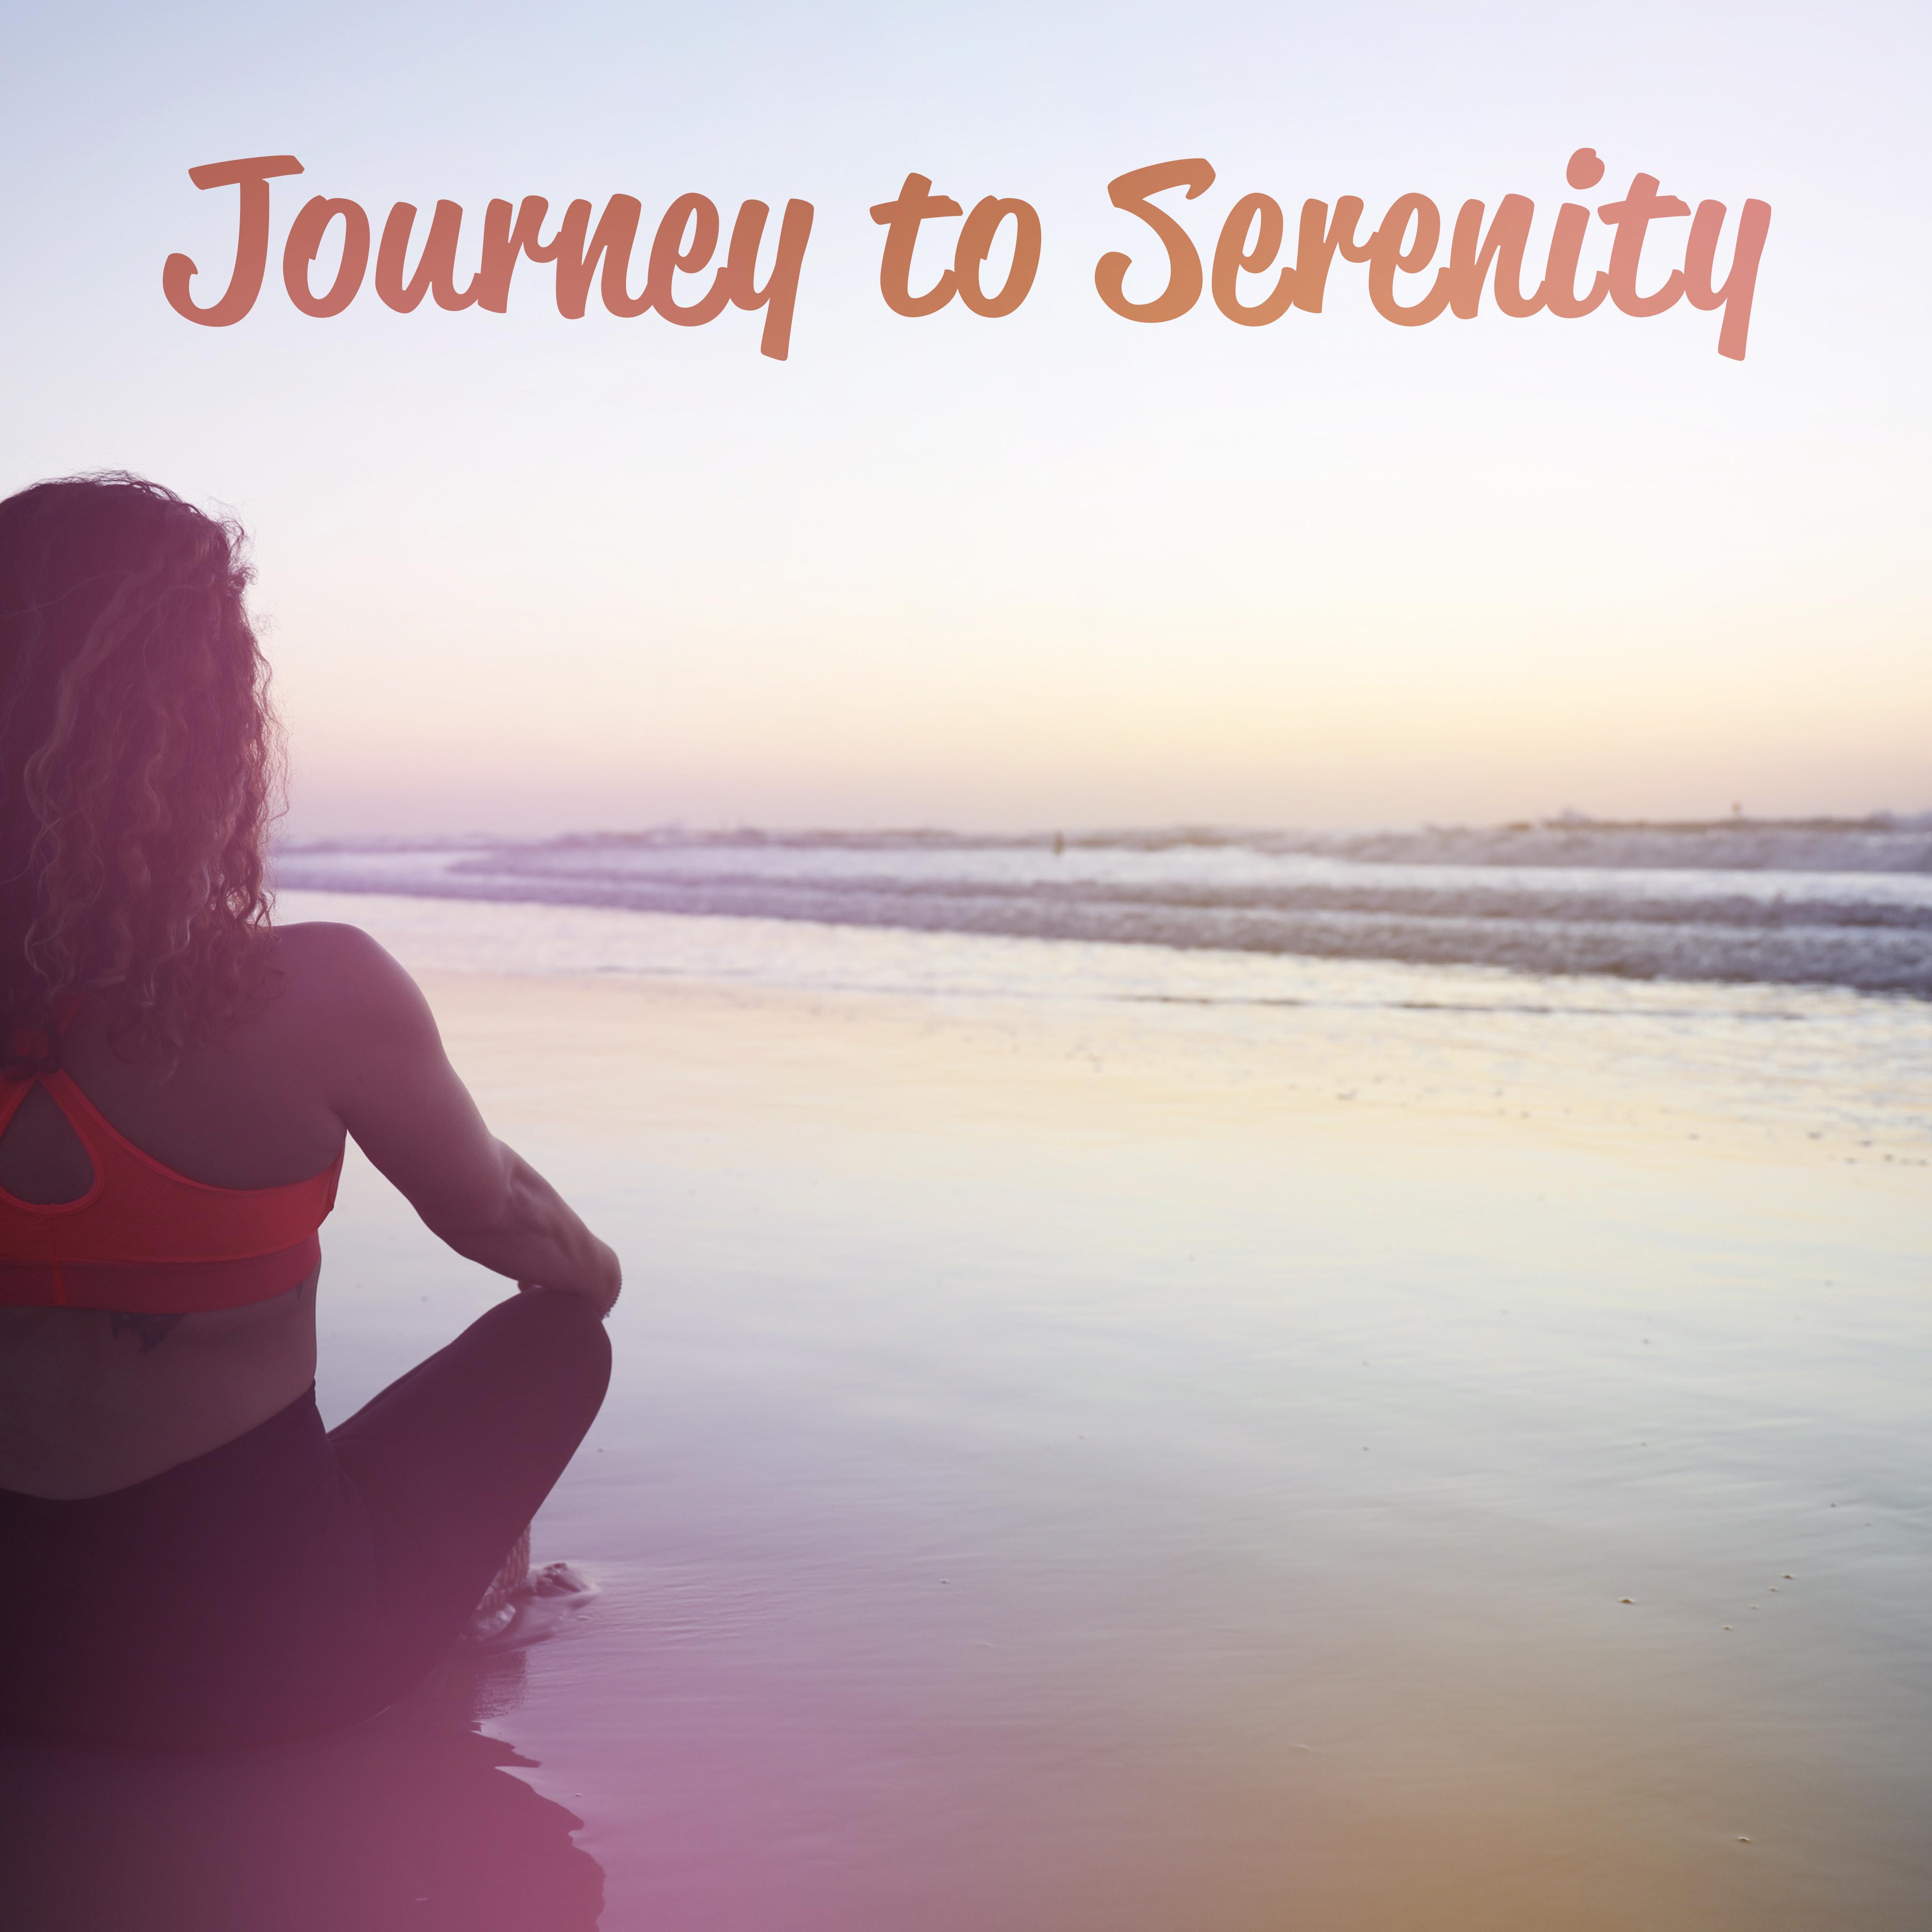 Journey to Serenity  New Age Music for Relaxation, Meditation, Sleep, Spa, Healing Music to Calm Down, Deeper Focus, New Age Vibes, Yoga Practice, Zen Lounge